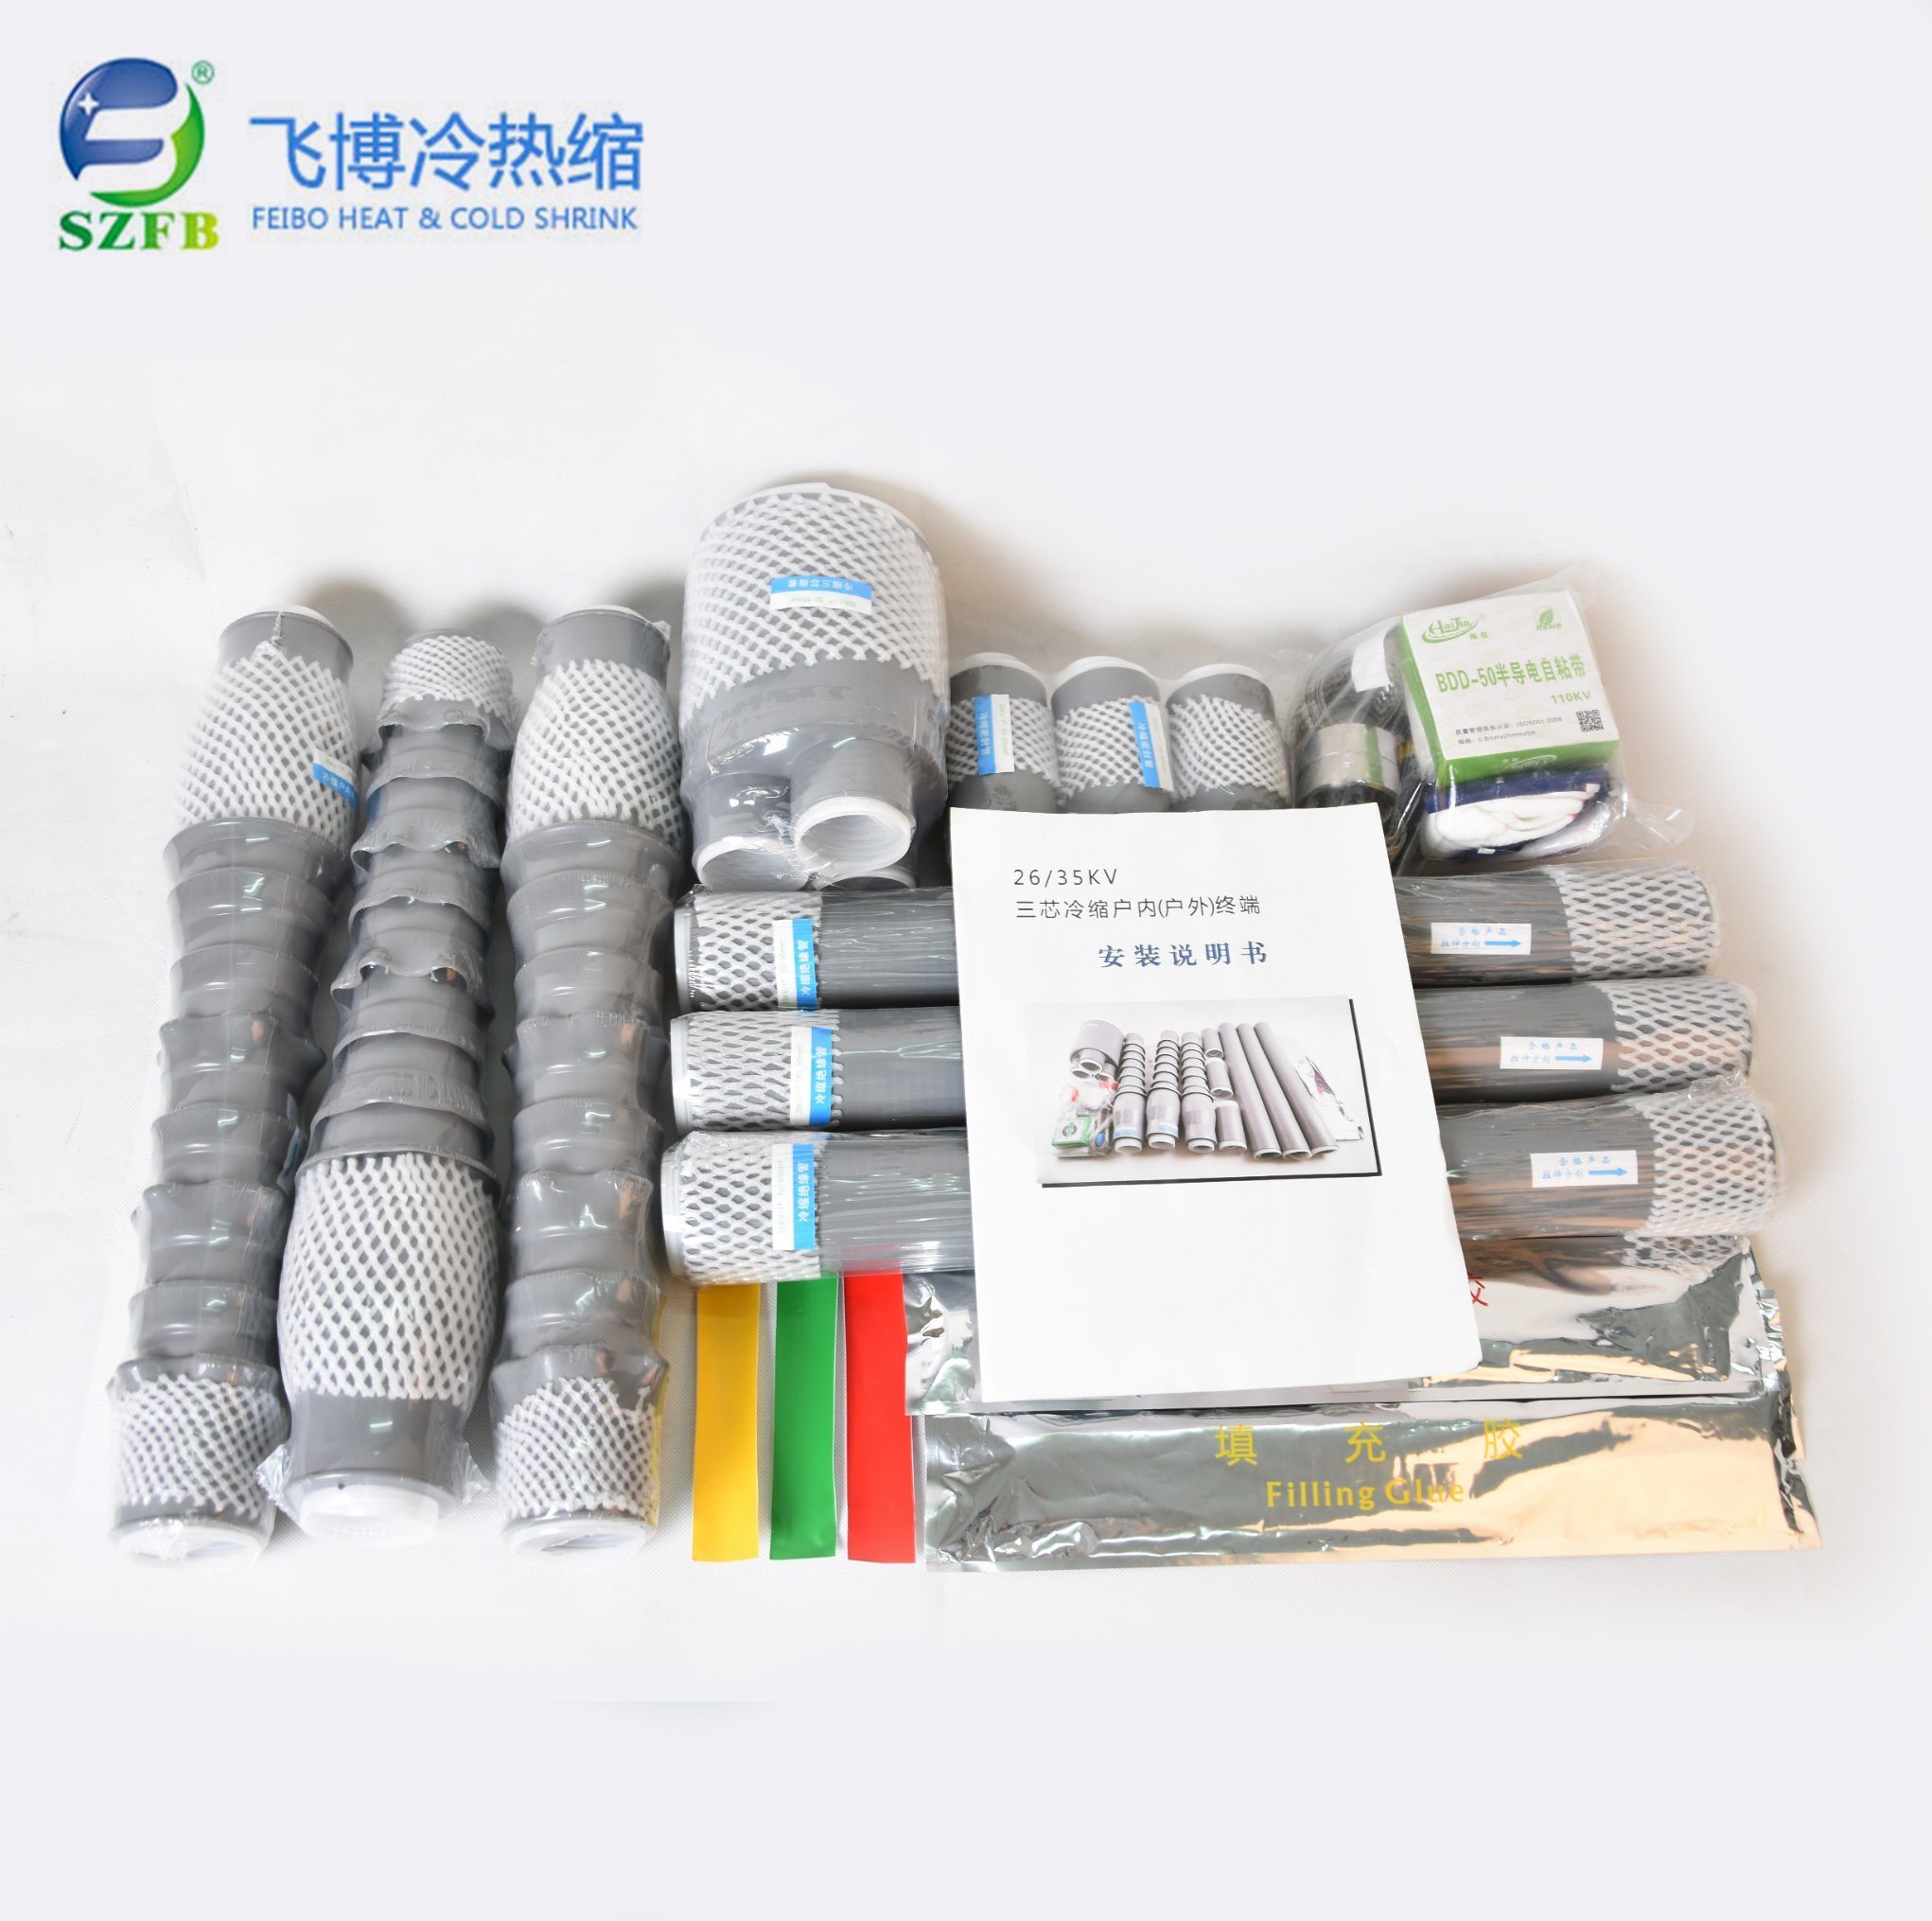 Szfb 10kv Termination Kits Outdoor Cable Accessories Cold Shrink Termination